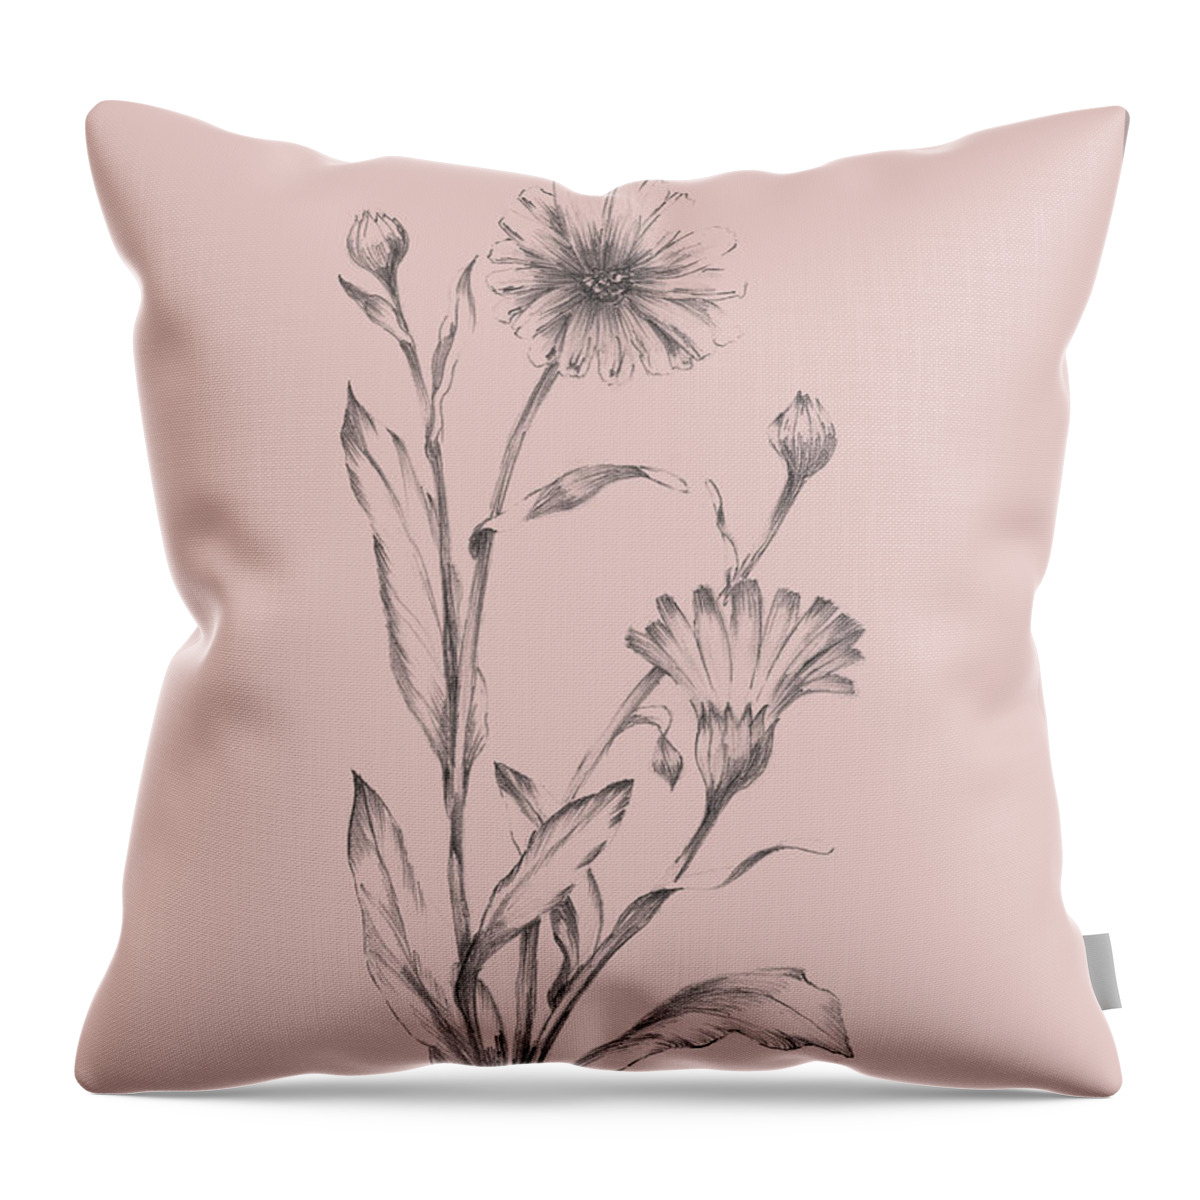 Flower Throw Pillow featuring the mixed media Pink Flower Sketch Illustration III by Naxart Studio